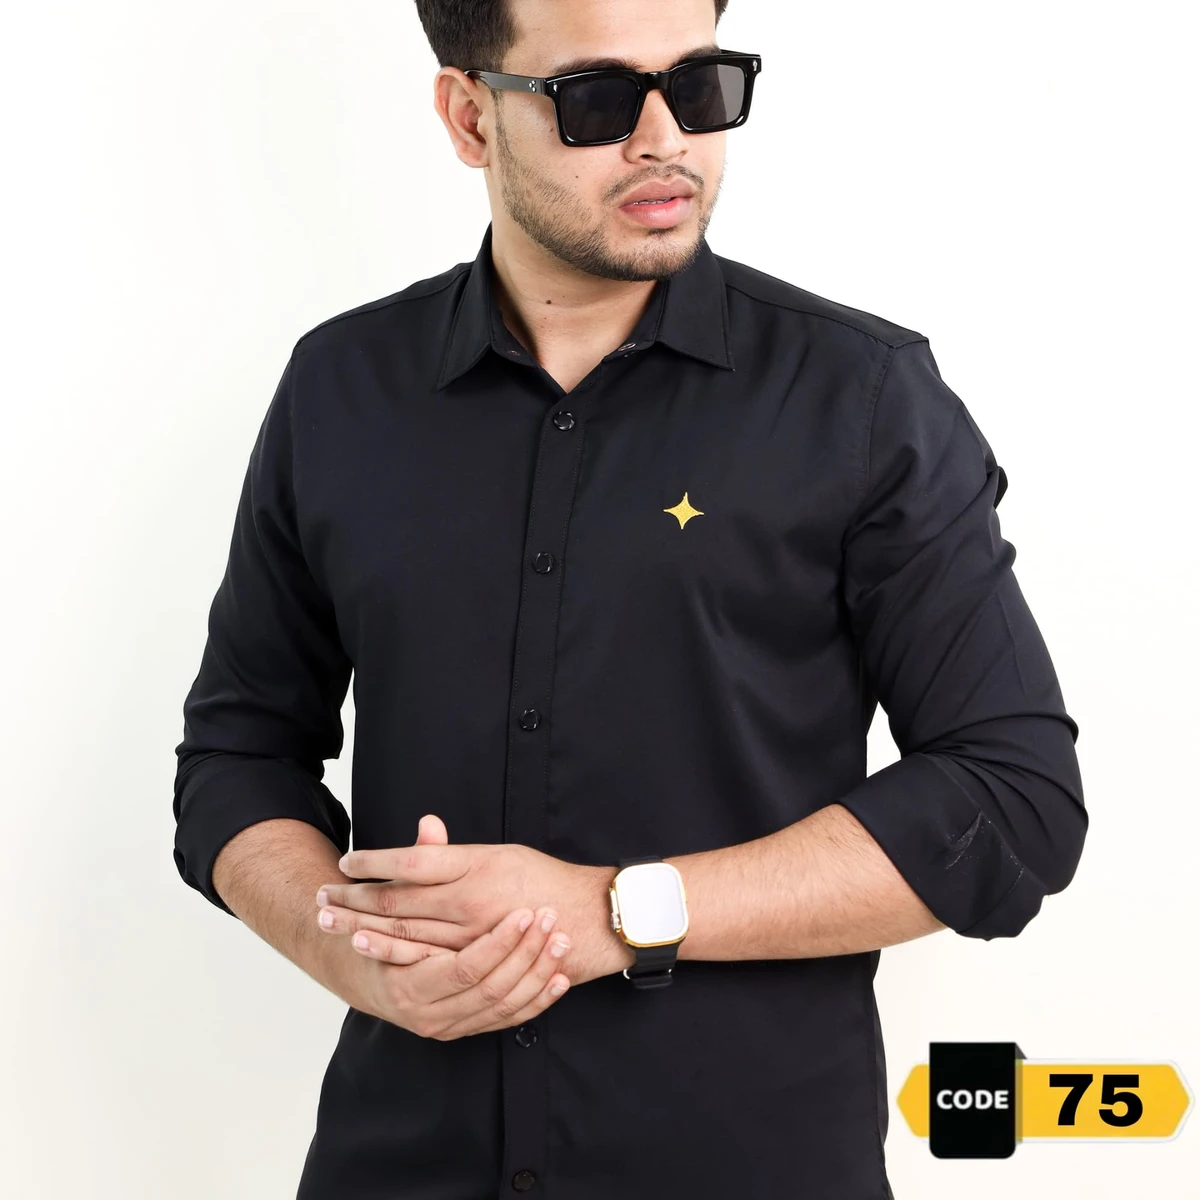 Black-Solide Colour Full Sleeve Casual Shirt - (Code-75)